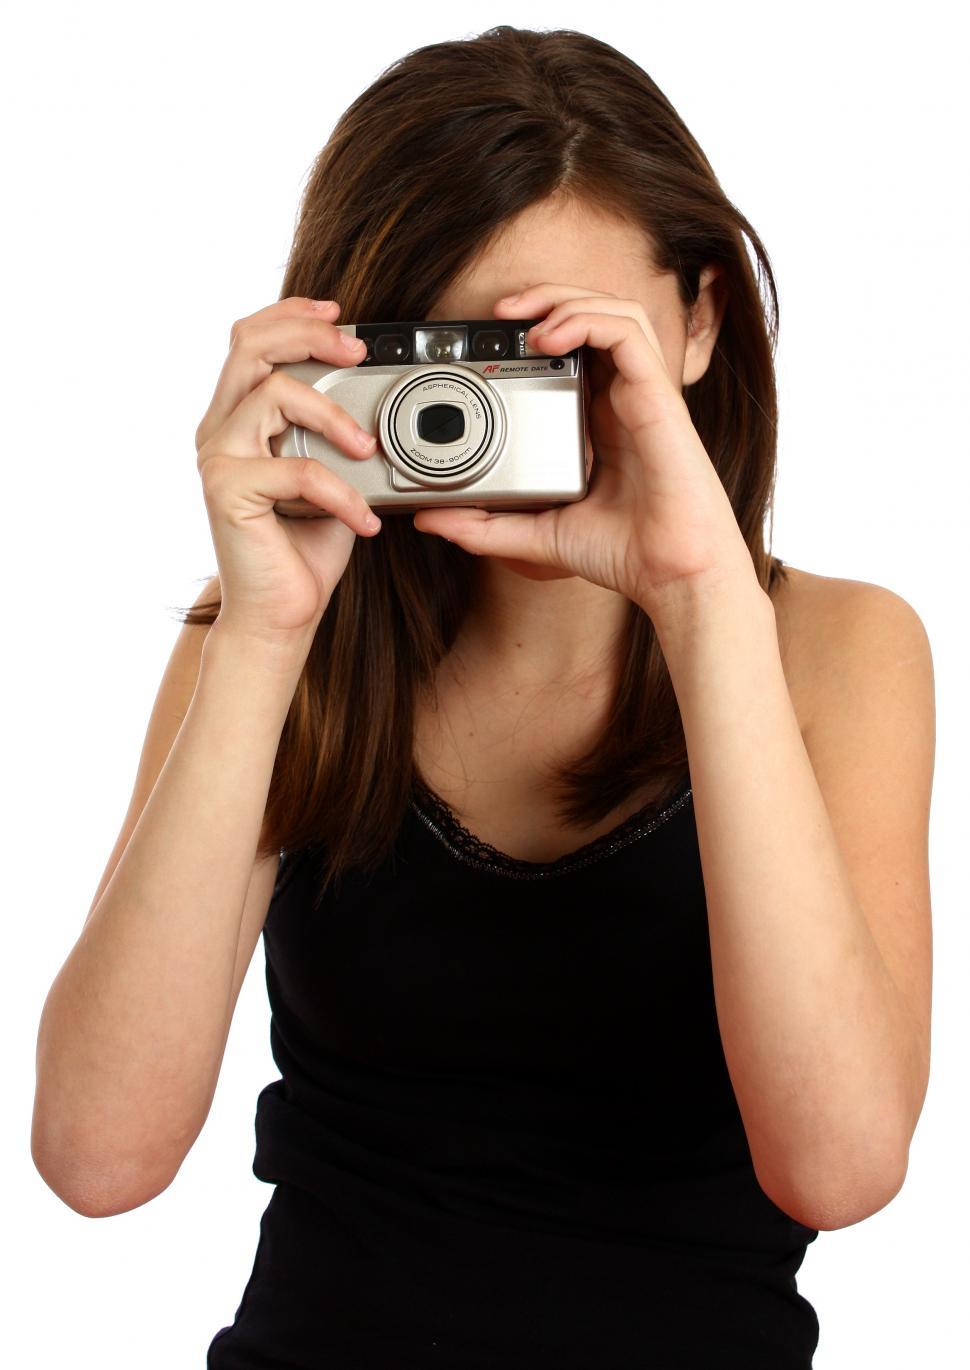 Free Image of A cute young girl taking a picture with a camera 